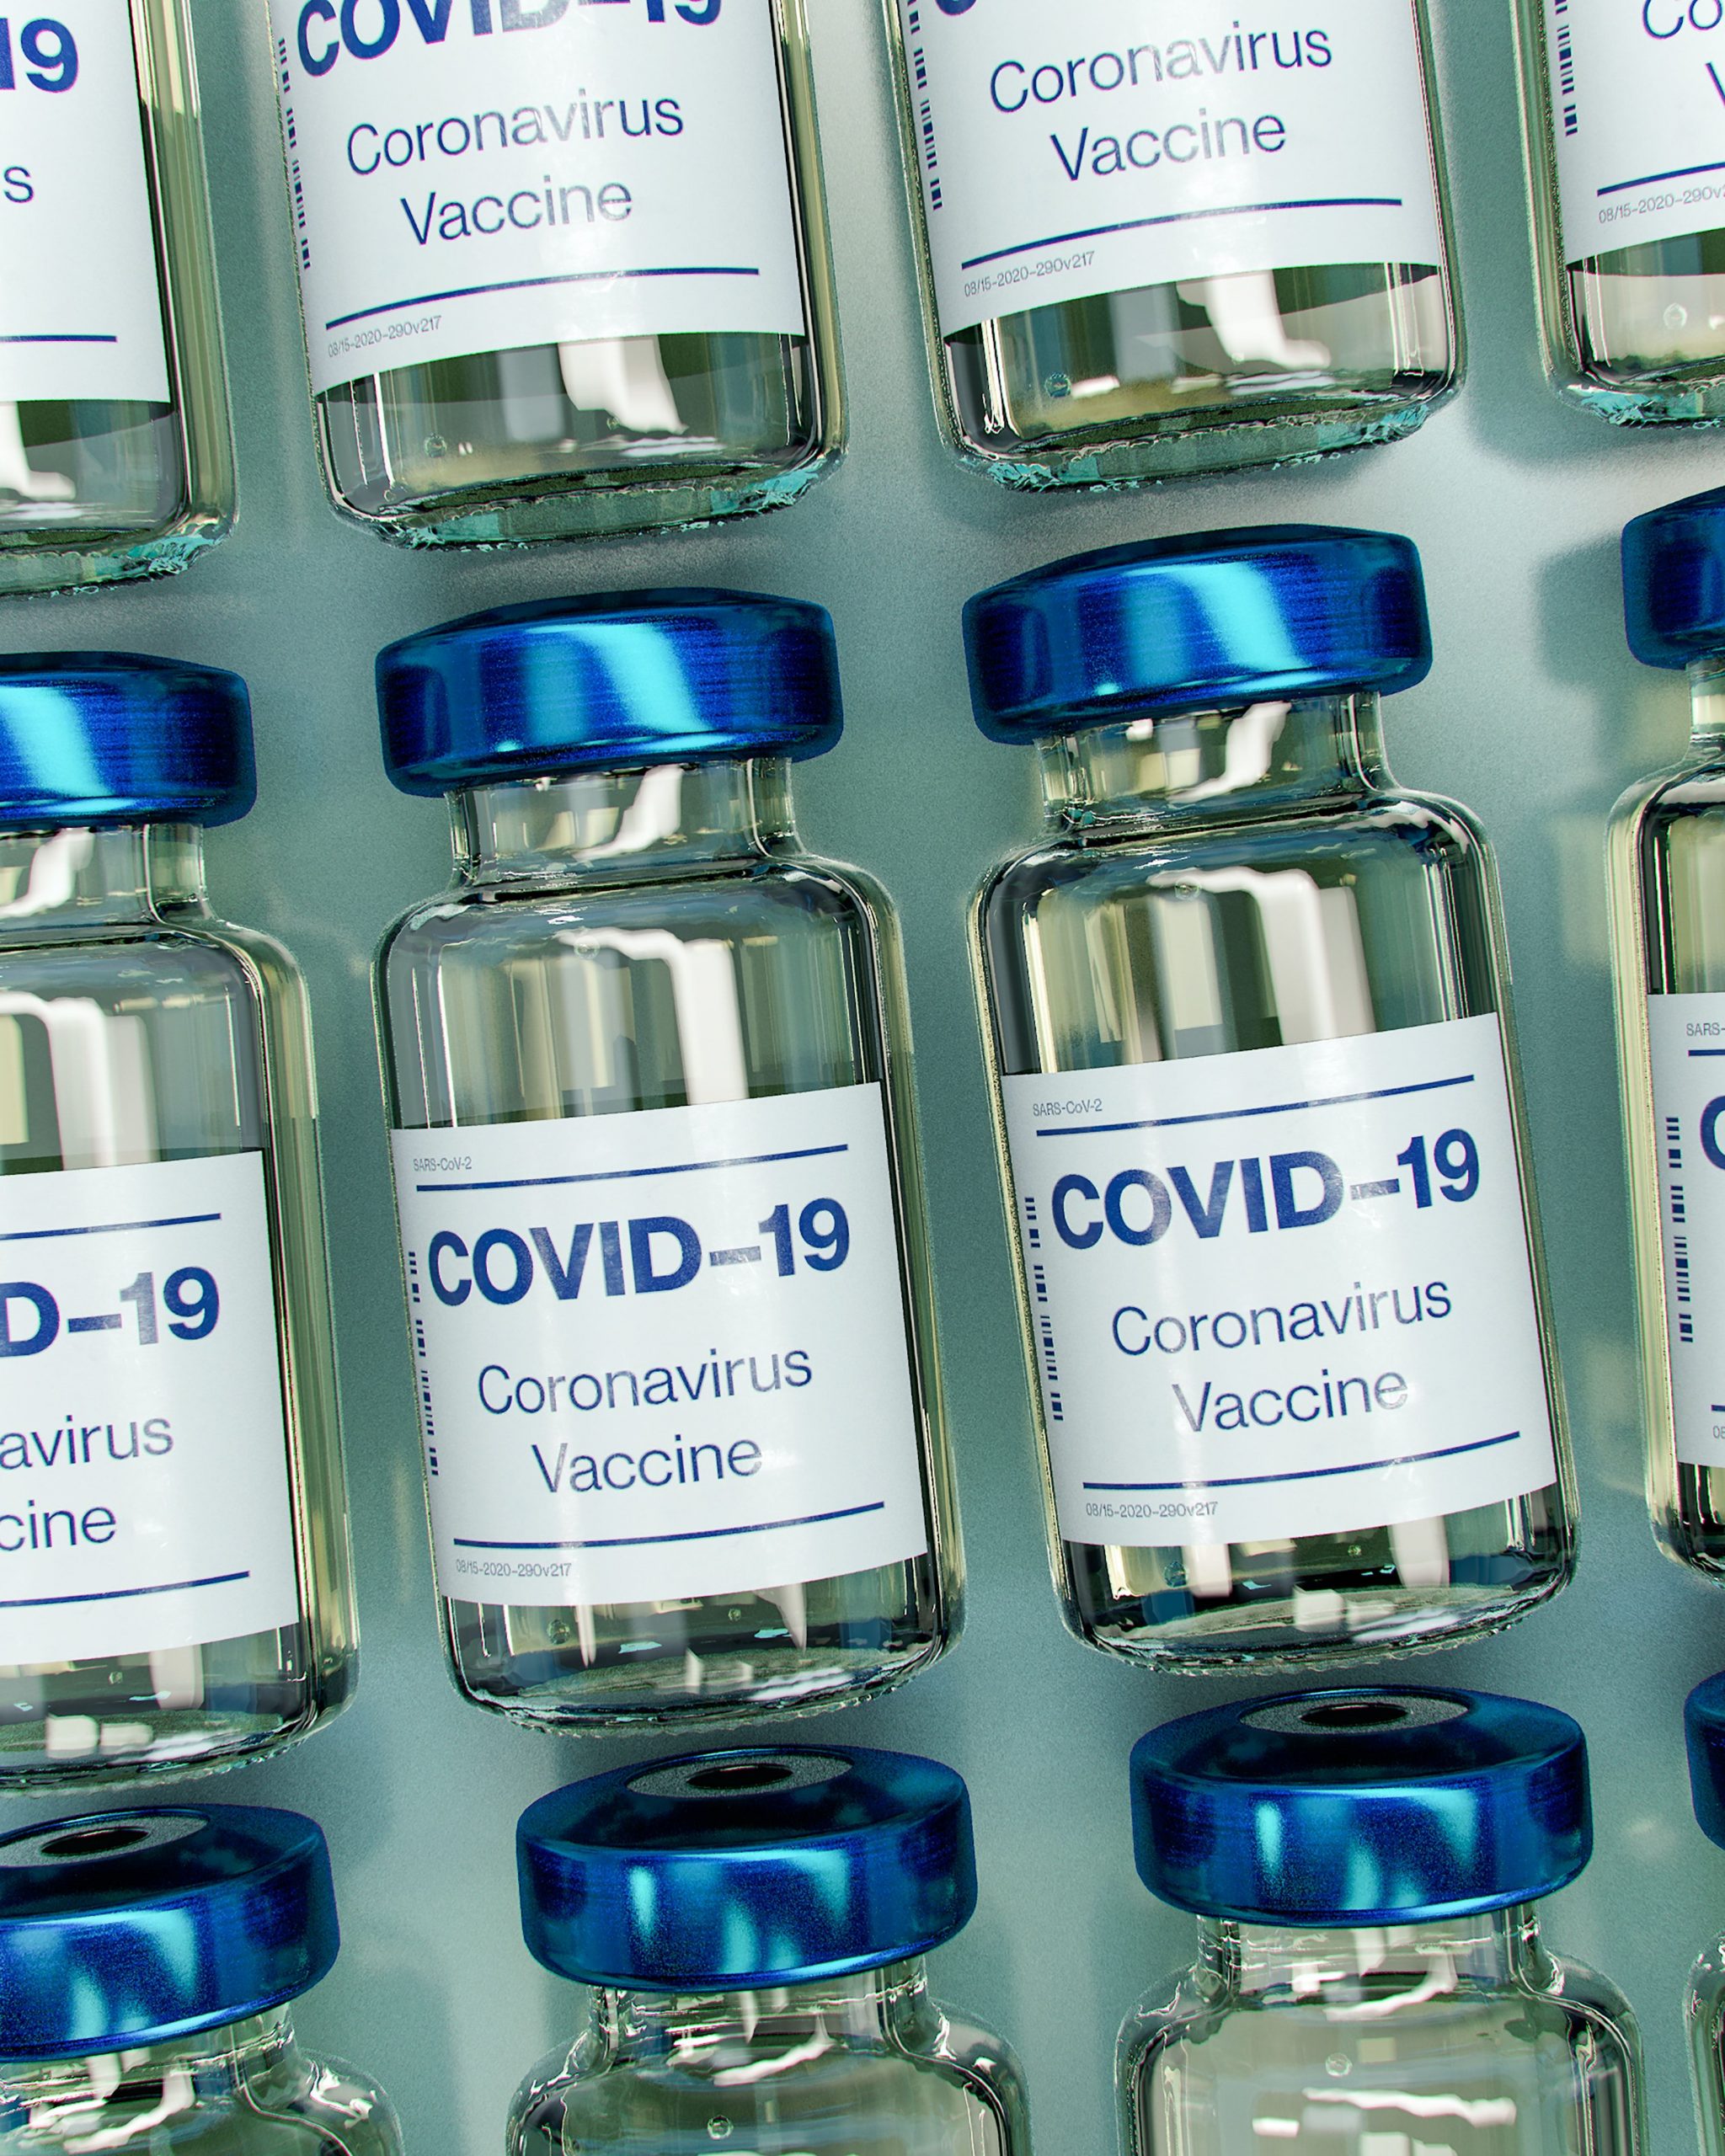 Pharmacies in the US to offer COVID-19 vaccines from February 11